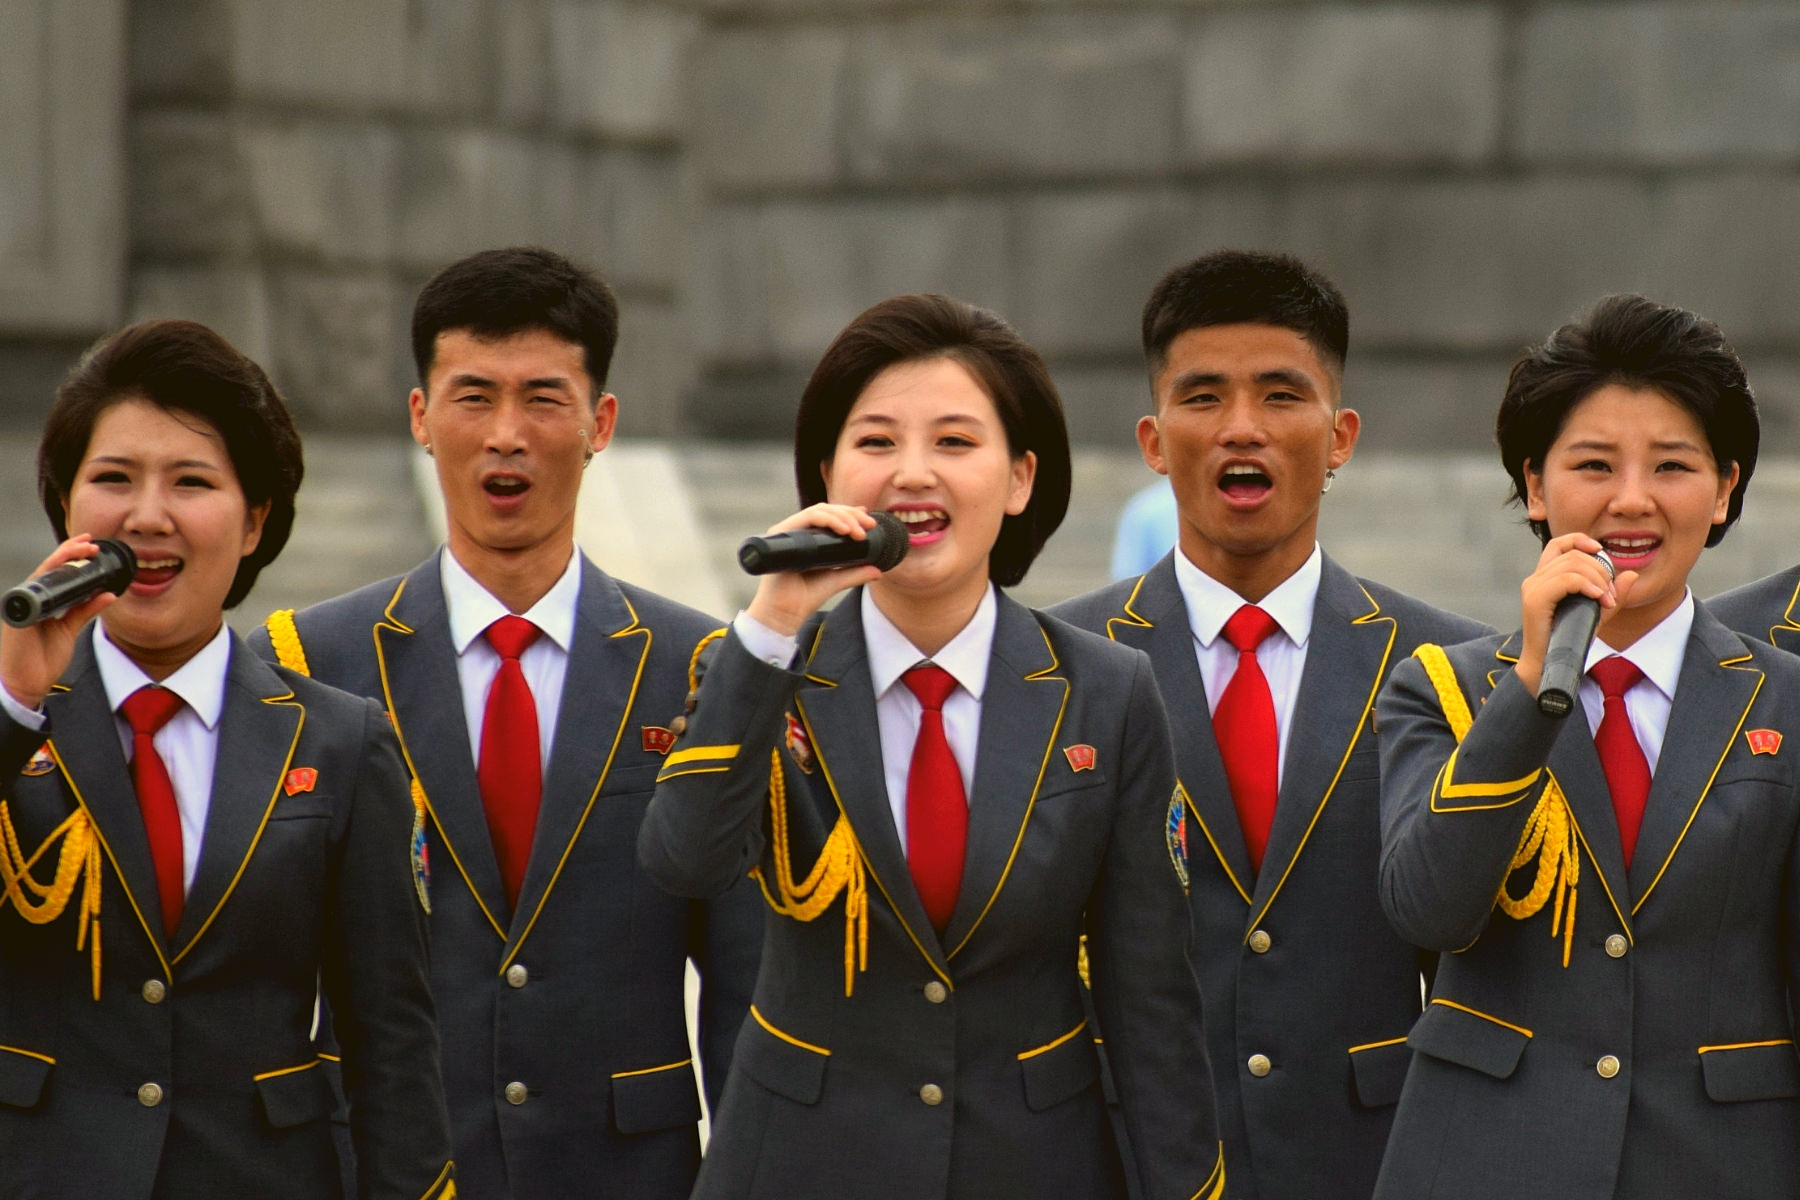 Street concert in Pyongyang on Liberation Day (15 August) in Pyongyang, North Korea by the Party Foundation Monument